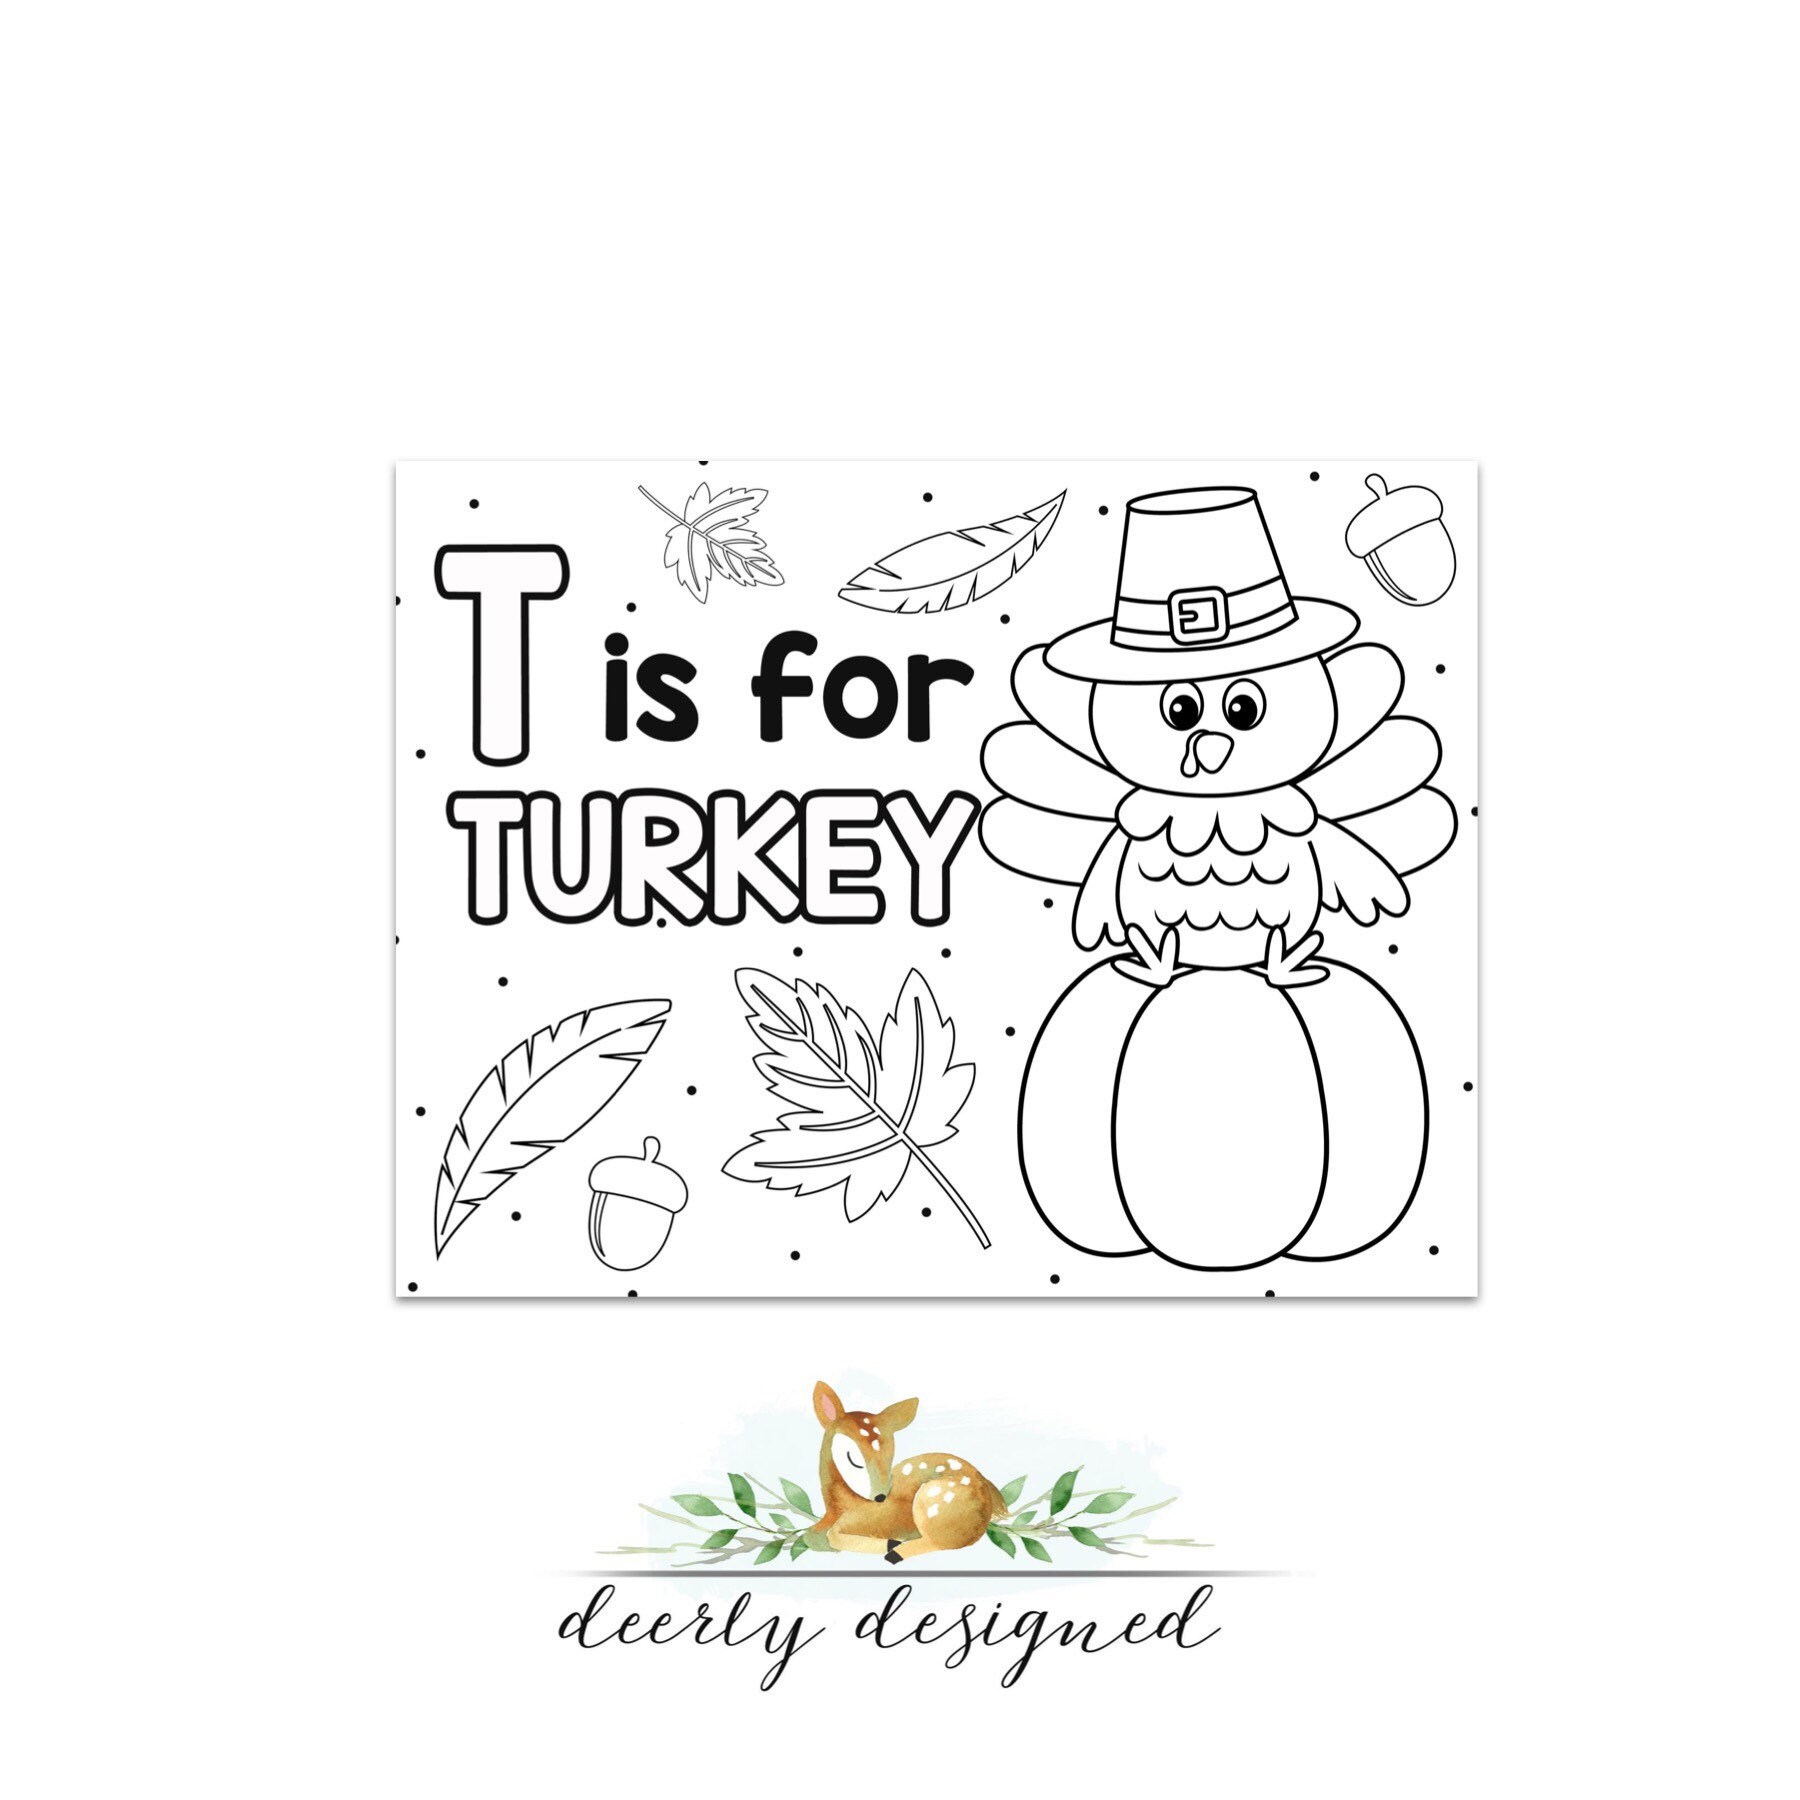 Free Printable Build a Turkey Coloring Page - Pjs and Paint  Thanksgiving  crafts preschool, Thanksgiving activities for kids, Thanksgiving preschool